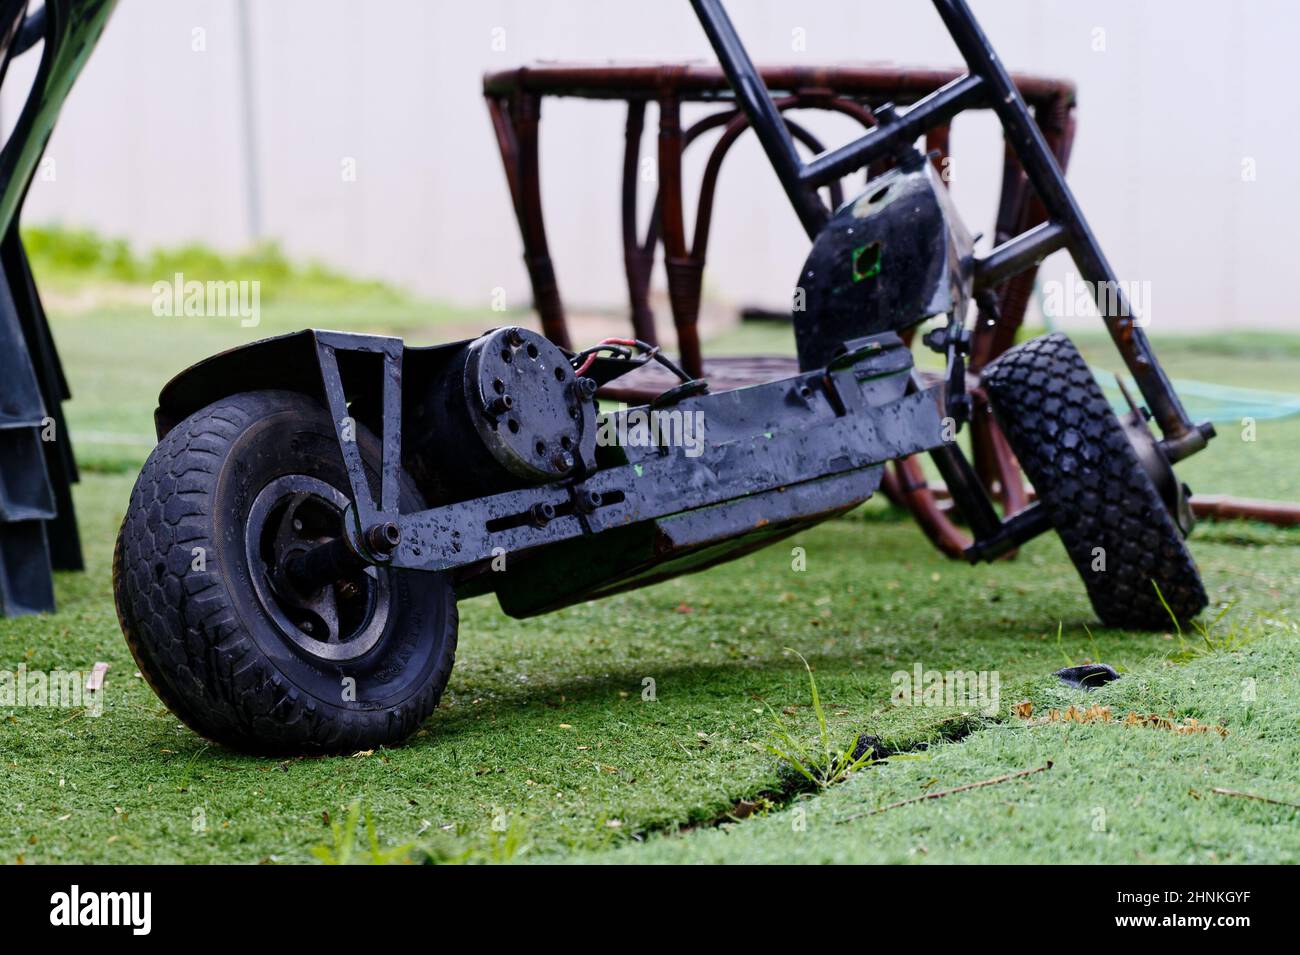 Black electric scooter on the grass close-up Stock Photo